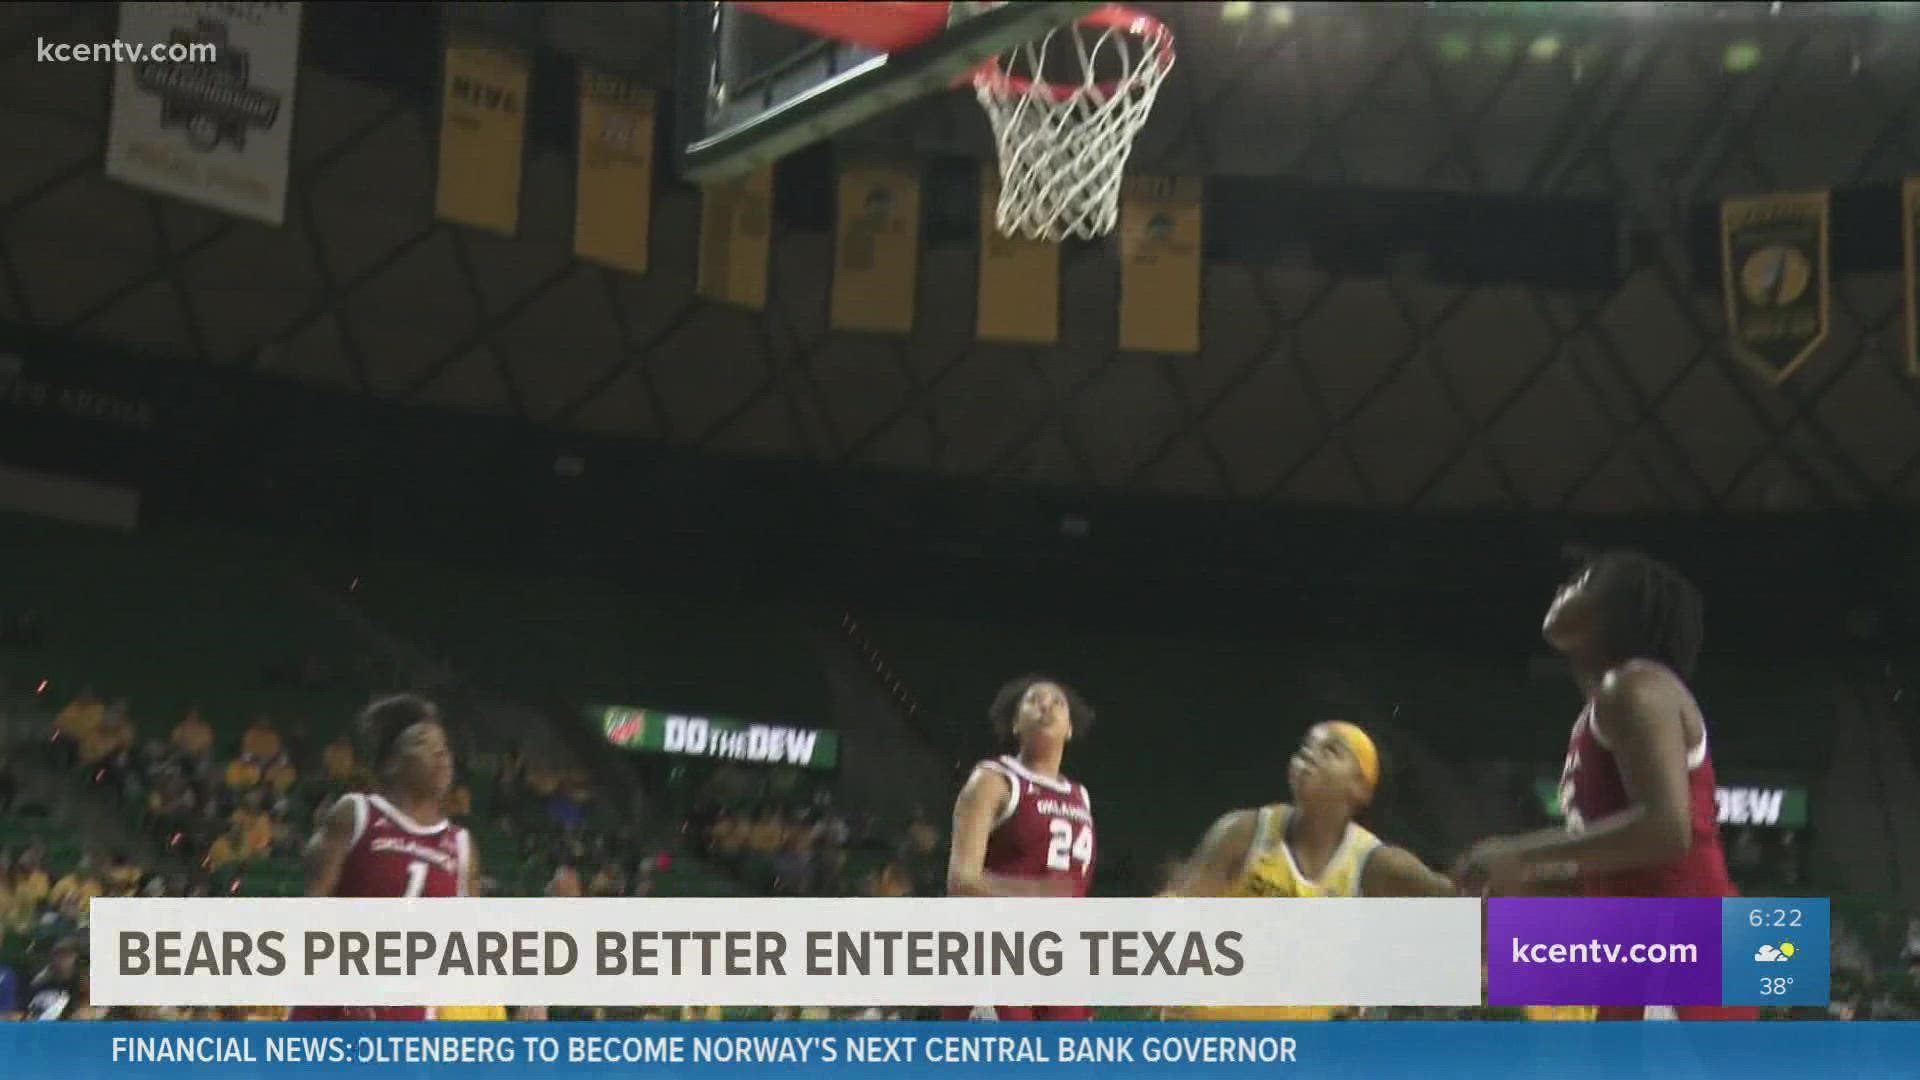 "We certainly have to be careful on how we prepare," says Baylor Women's Coach Nicki Collen.